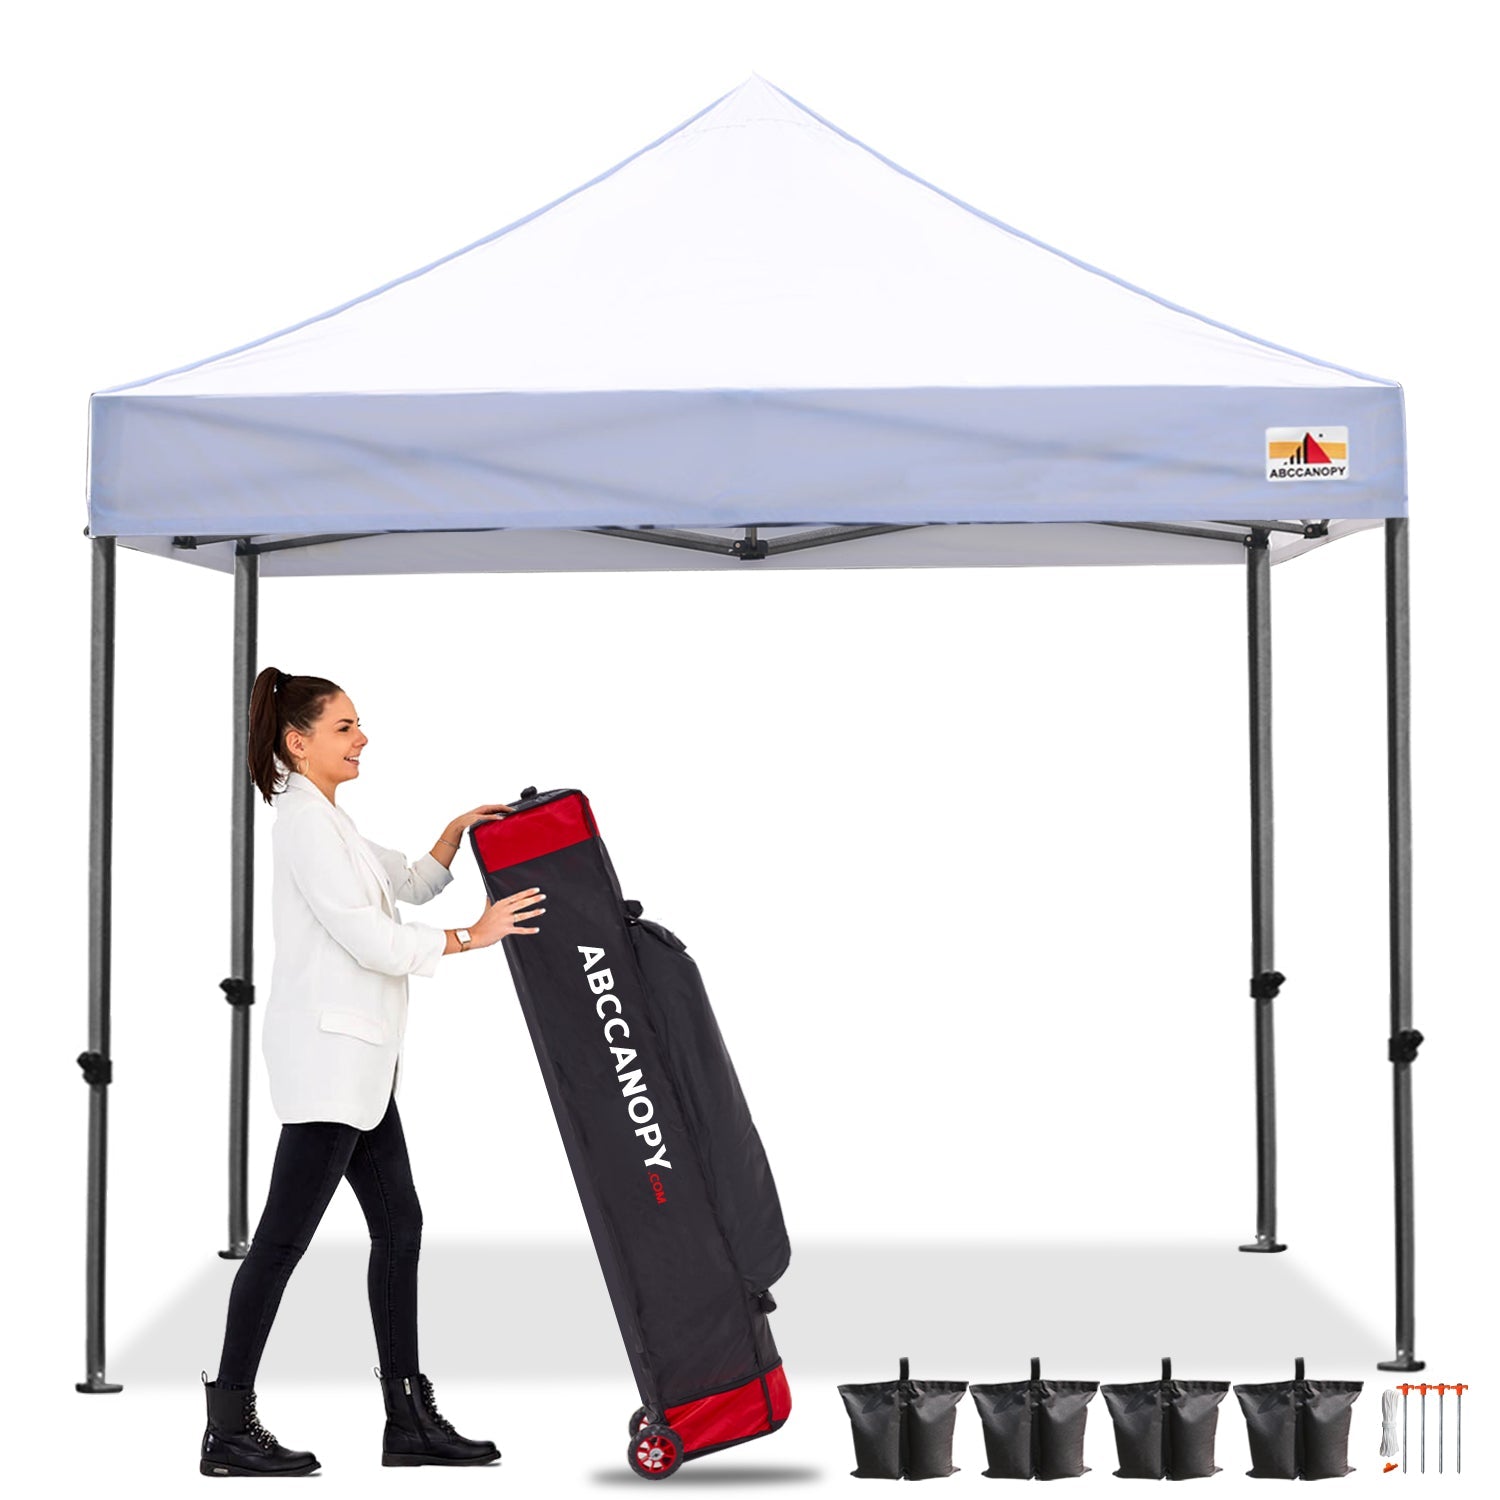 S1 Commercial Durable Easy Pop Up Canopy Tent 10x10 Instant Shelter